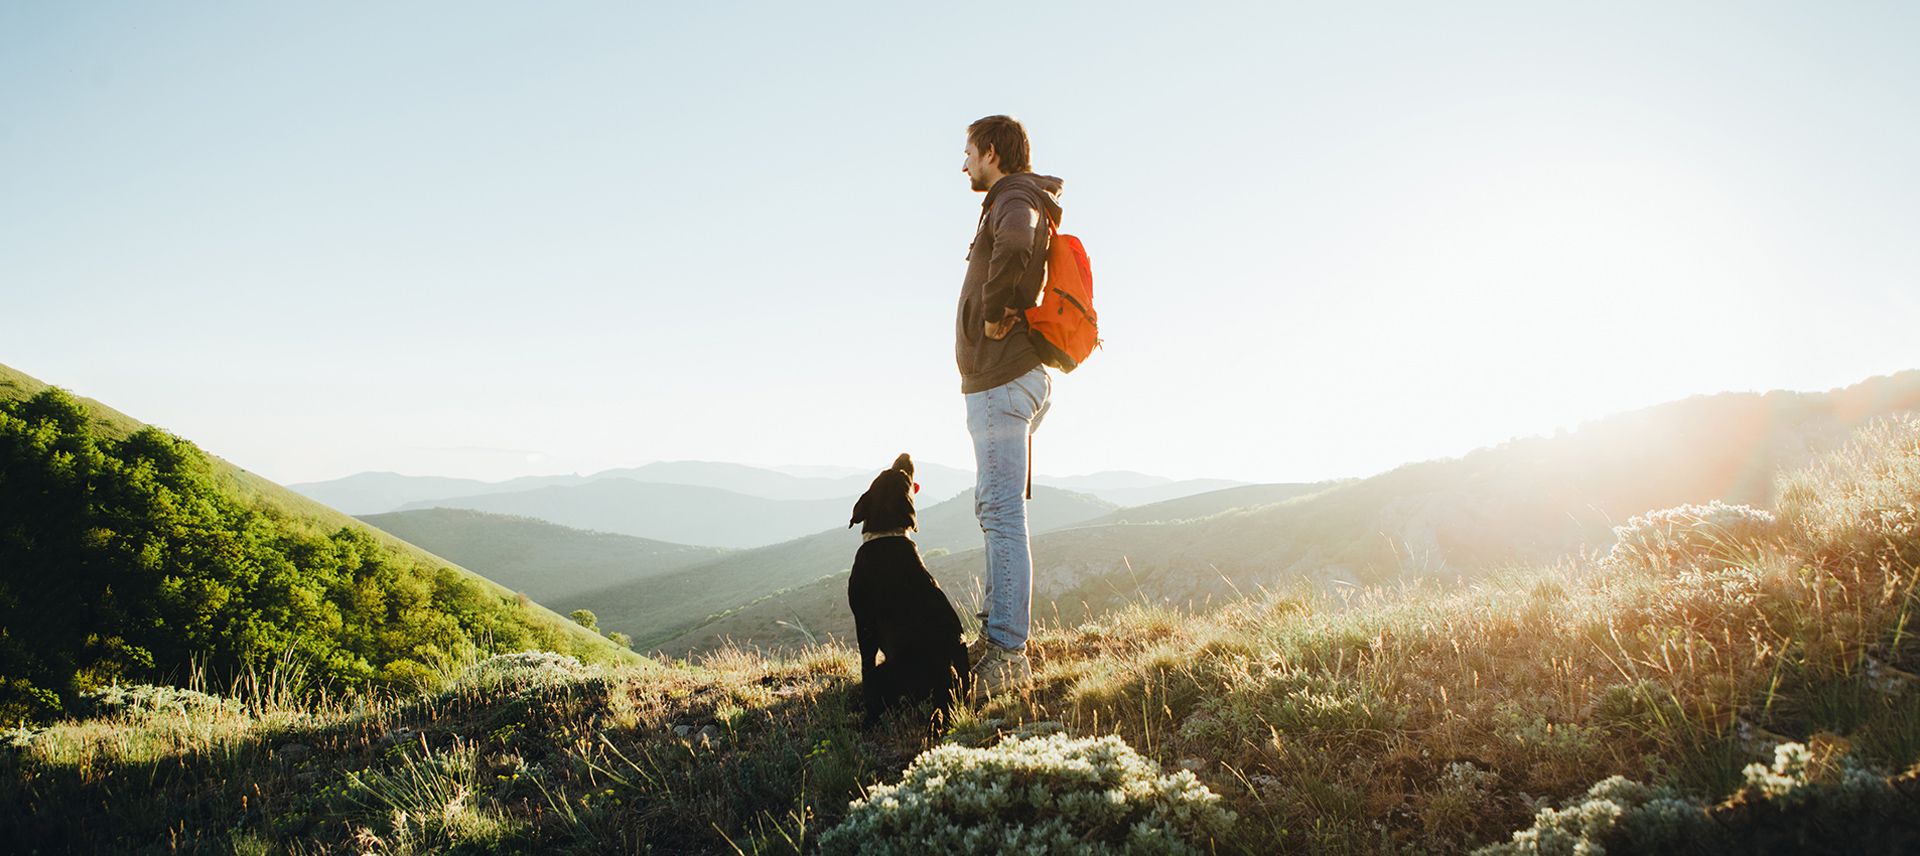 Man and dog on the mountain